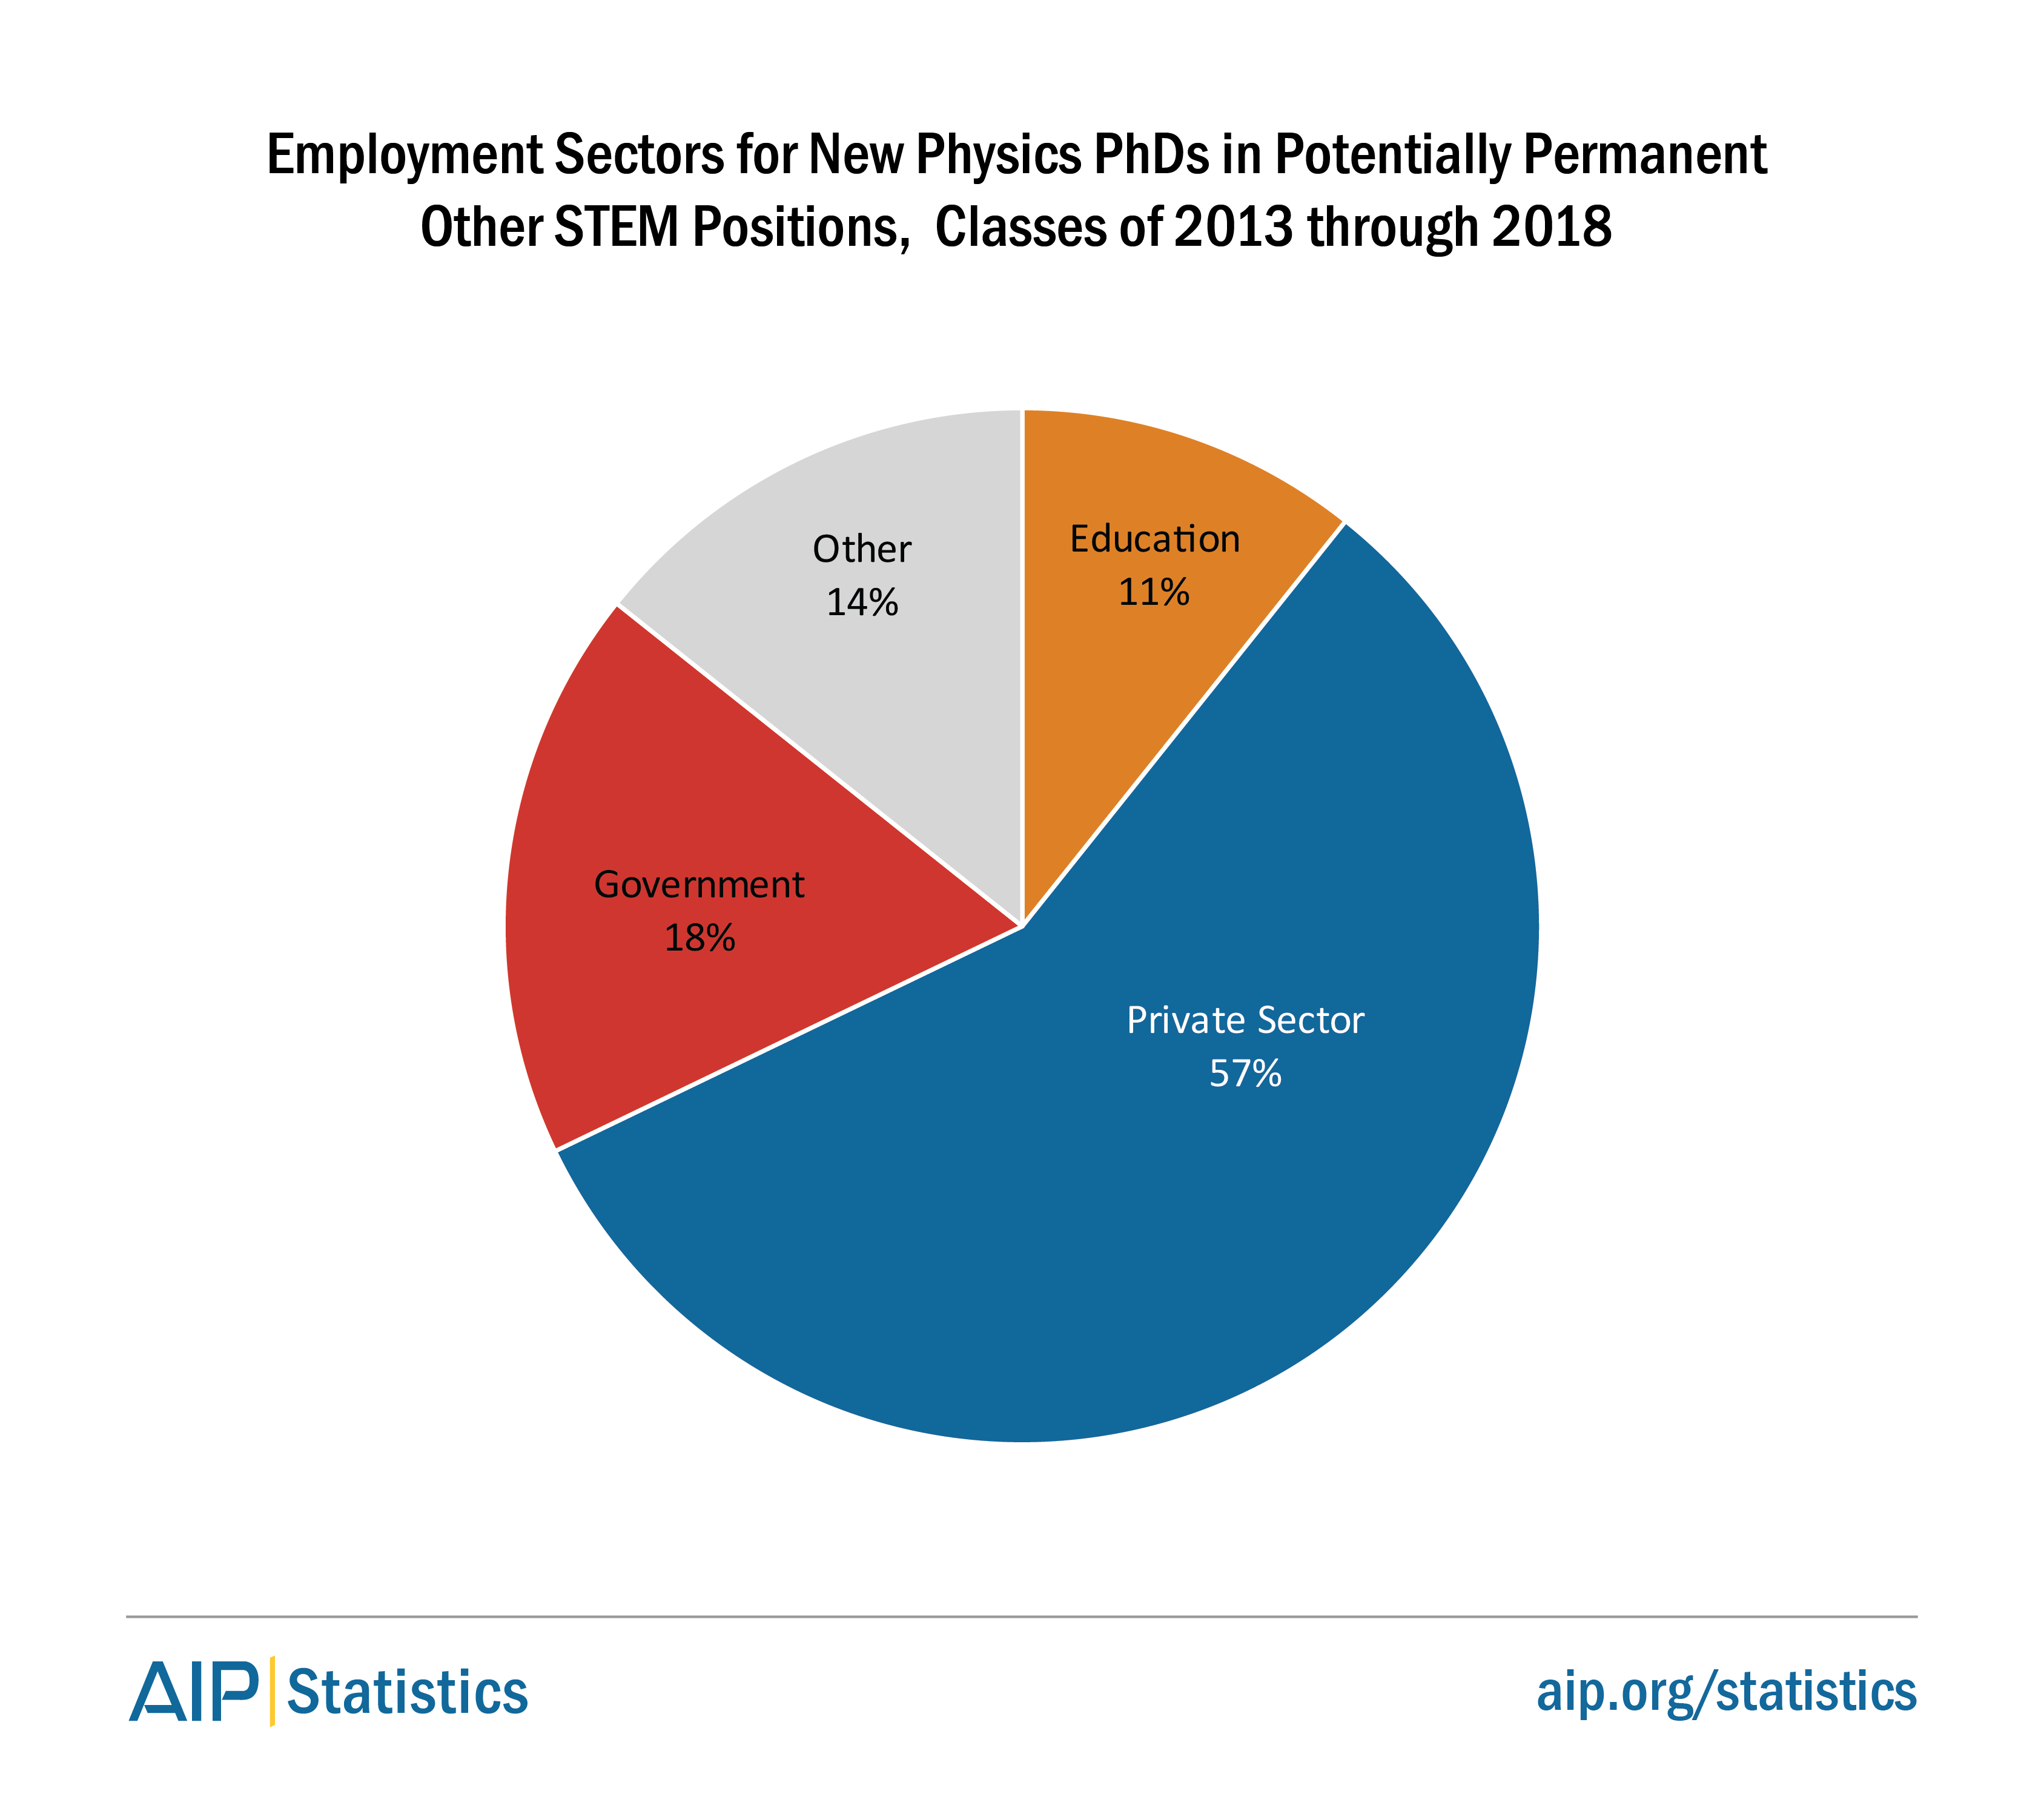 Employment Sectors for Physics PhDs in Other STEM positions